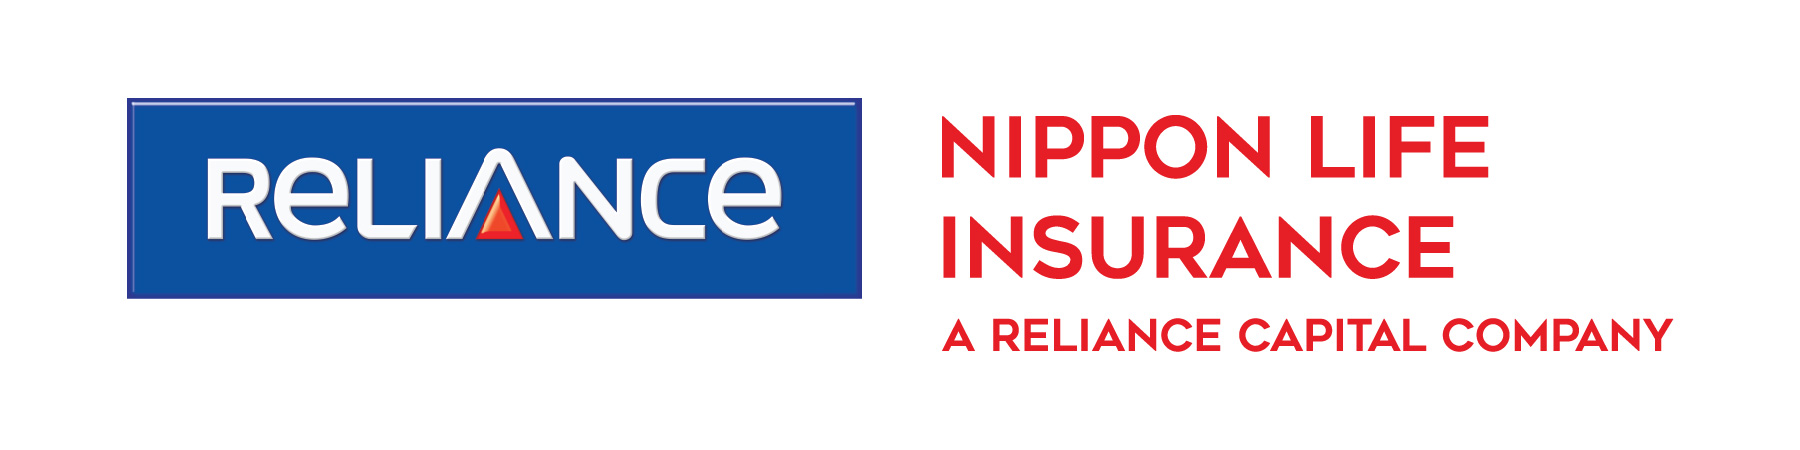 Reliance Nippon Life Insurance Launches 'Digi Daftar' – A Unique App To Empower Financial Advisors